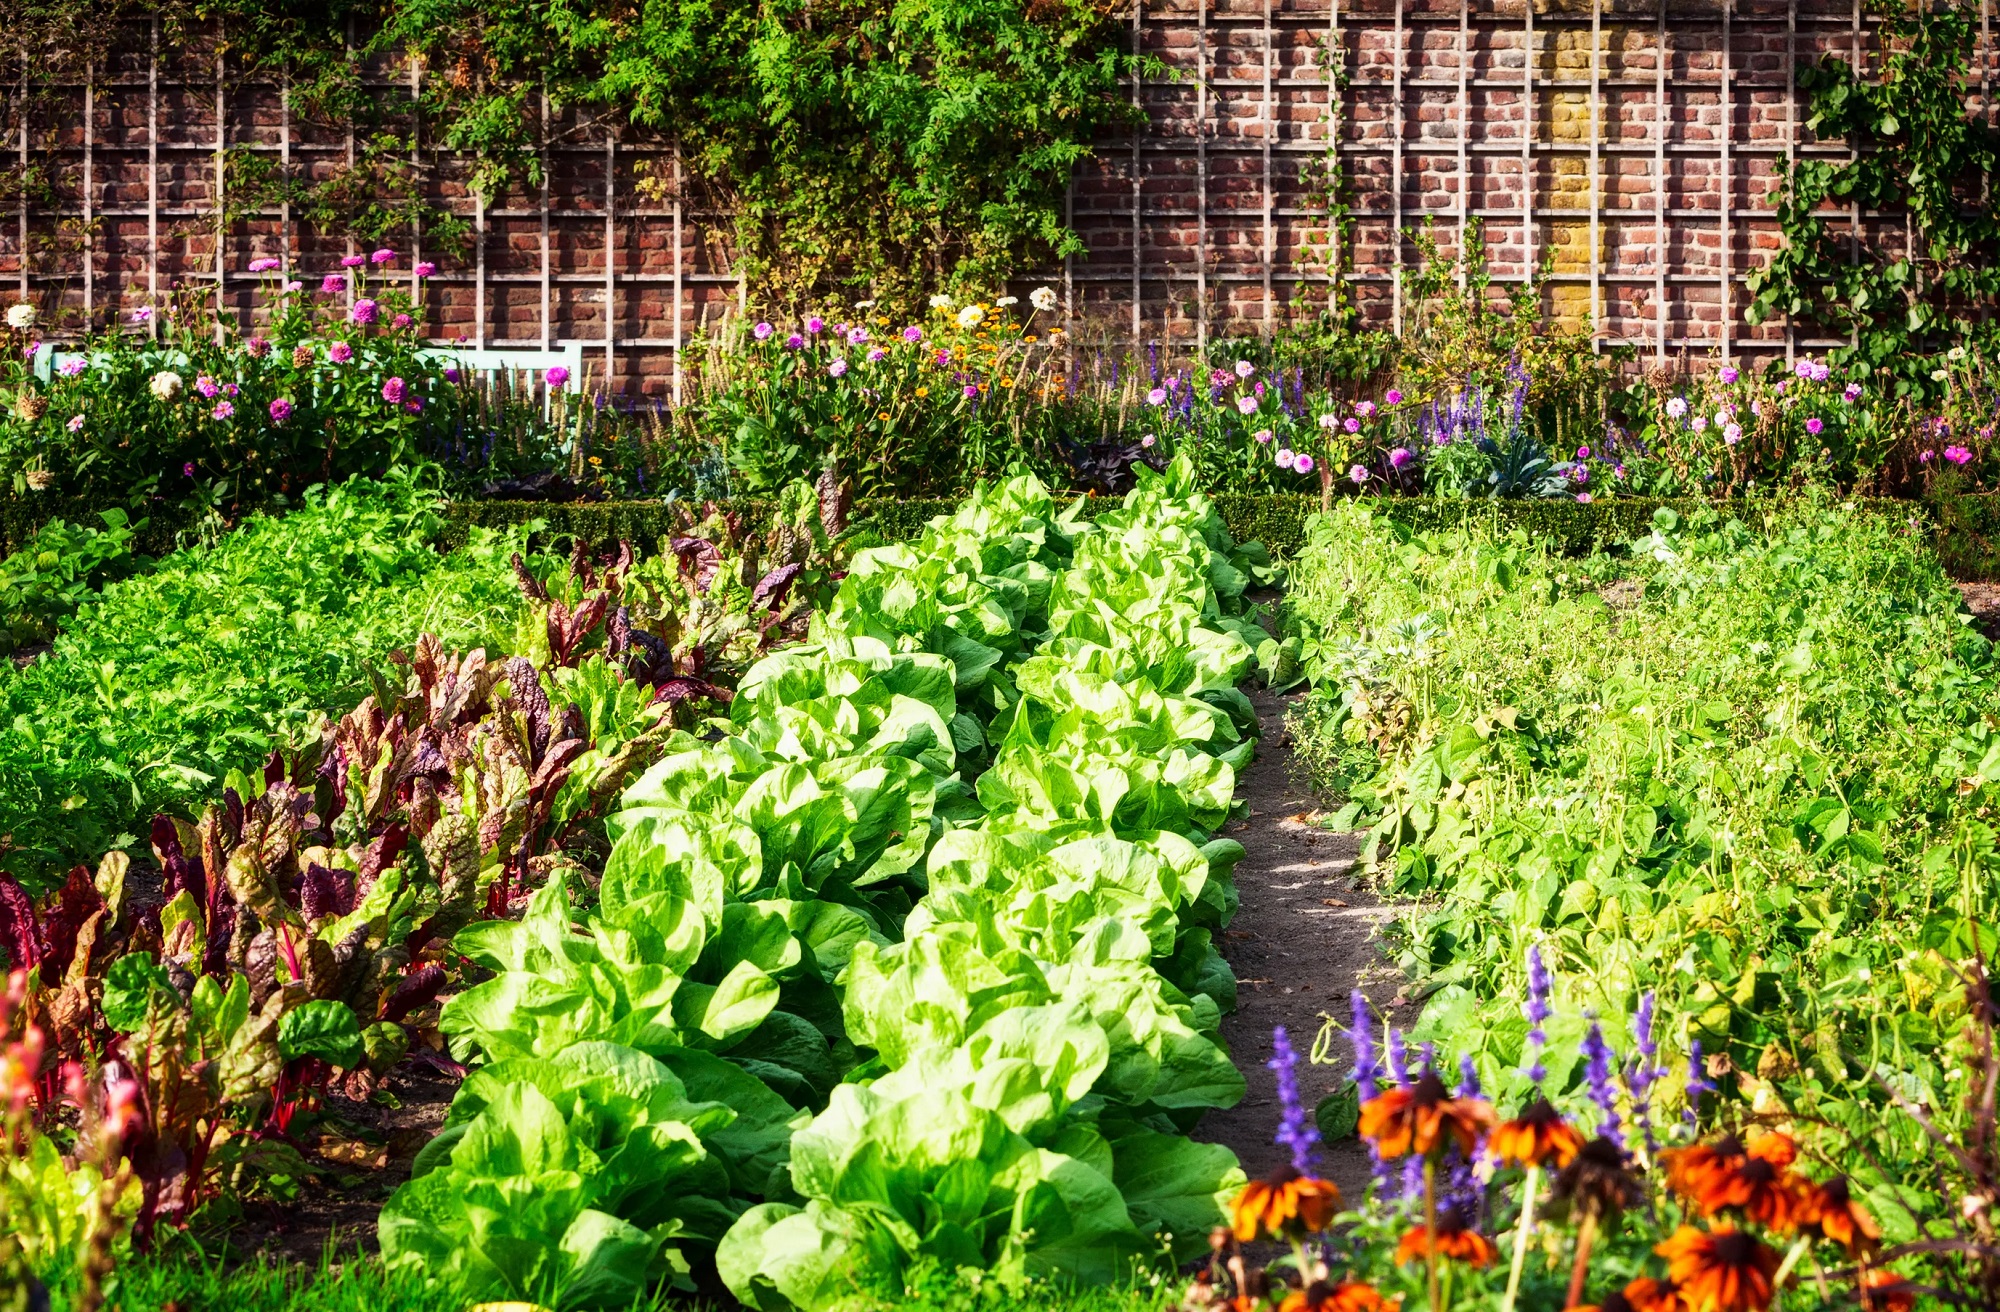 Growing Your Own Vegetables: Step-by-Step